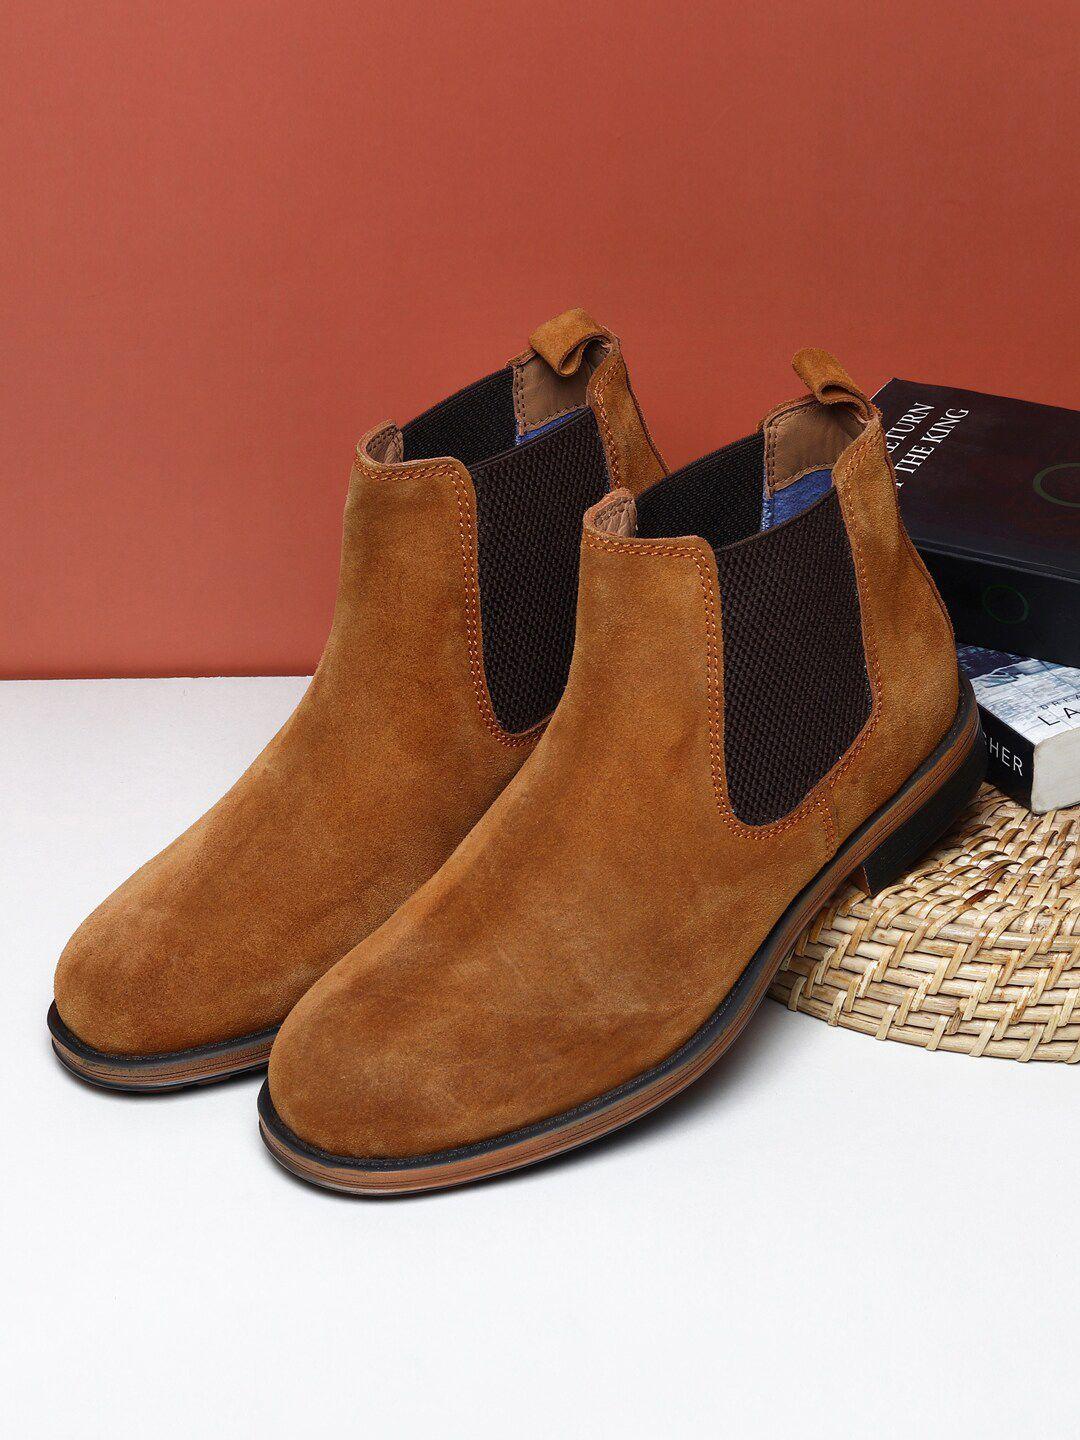 teakwood leathers men tan brown solid leather chelsea boots